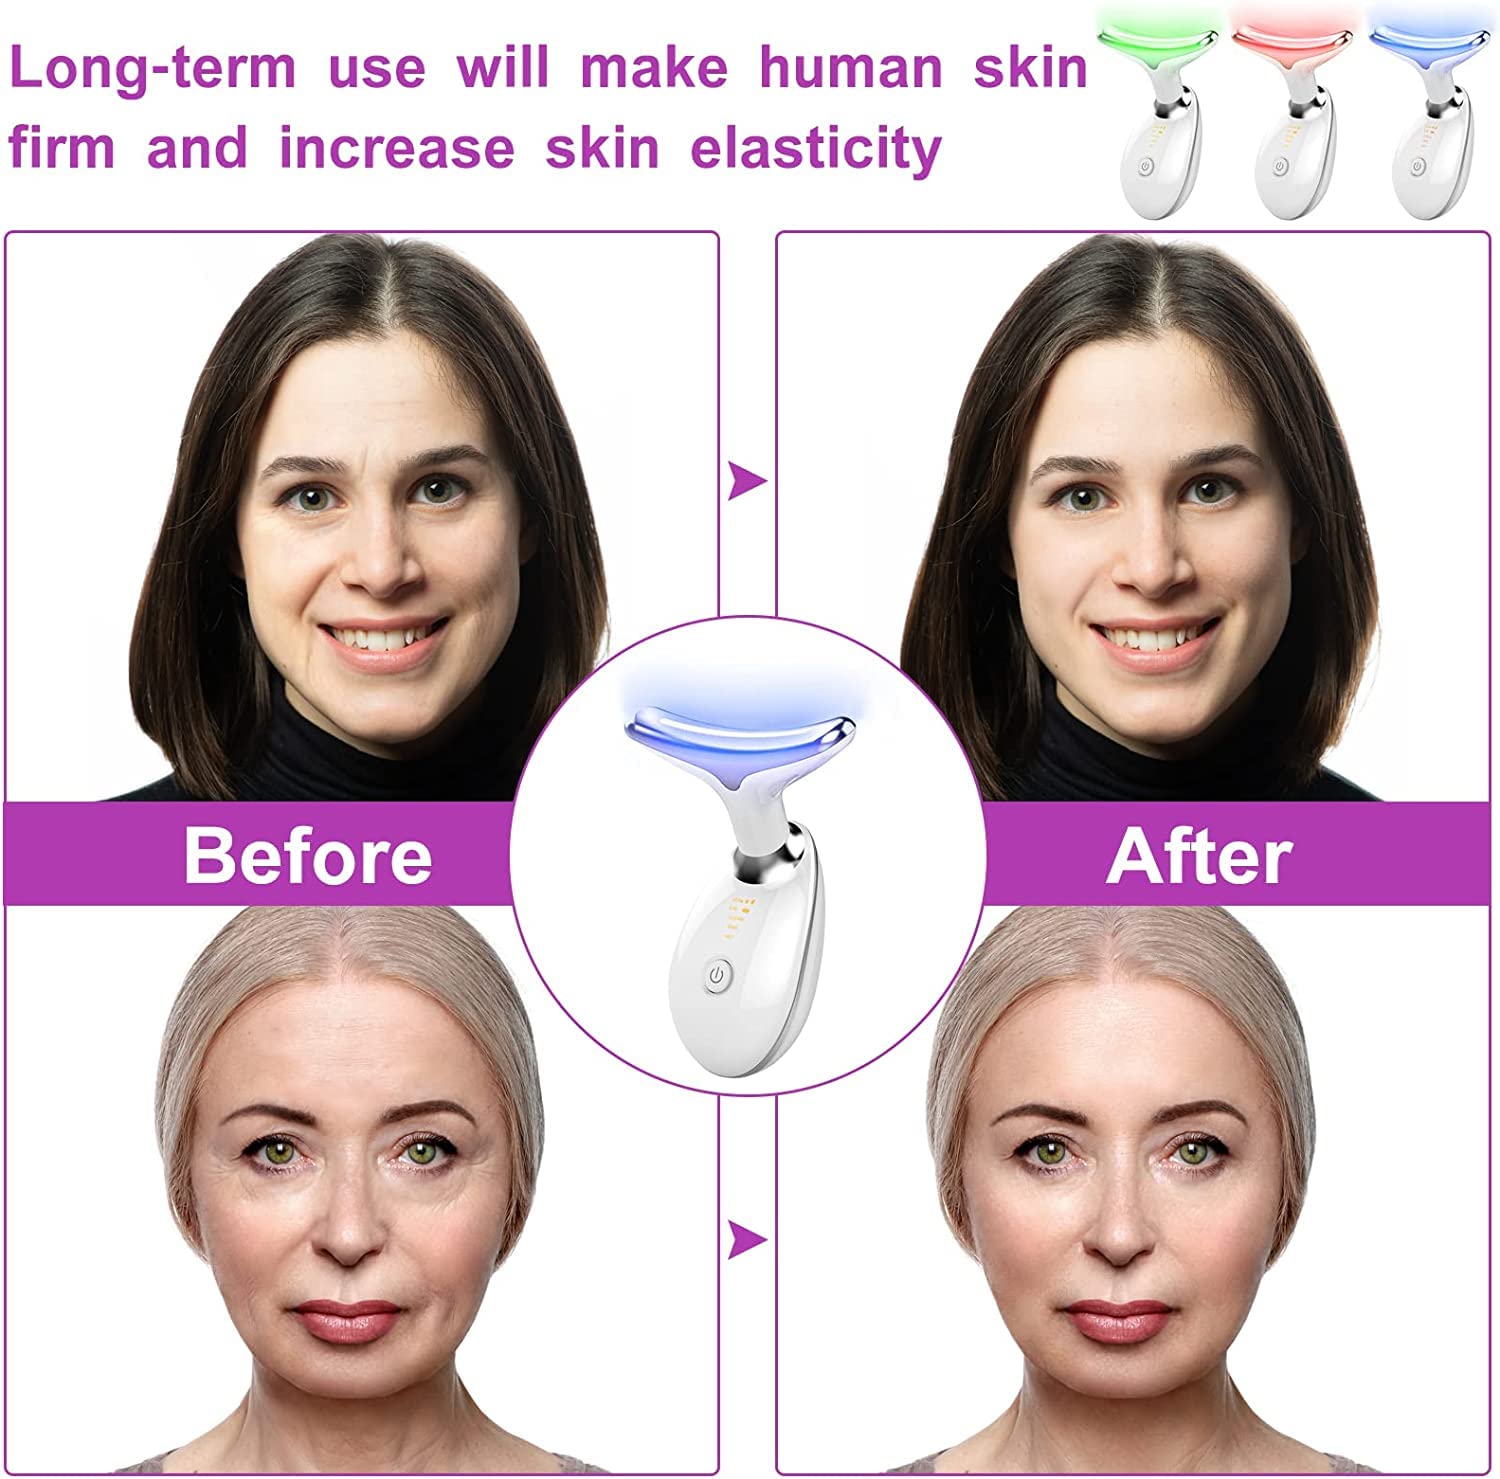 Vibrating Face & Neck Massager for Firming and Rejuvenation - Skin Lifting Beauty Device